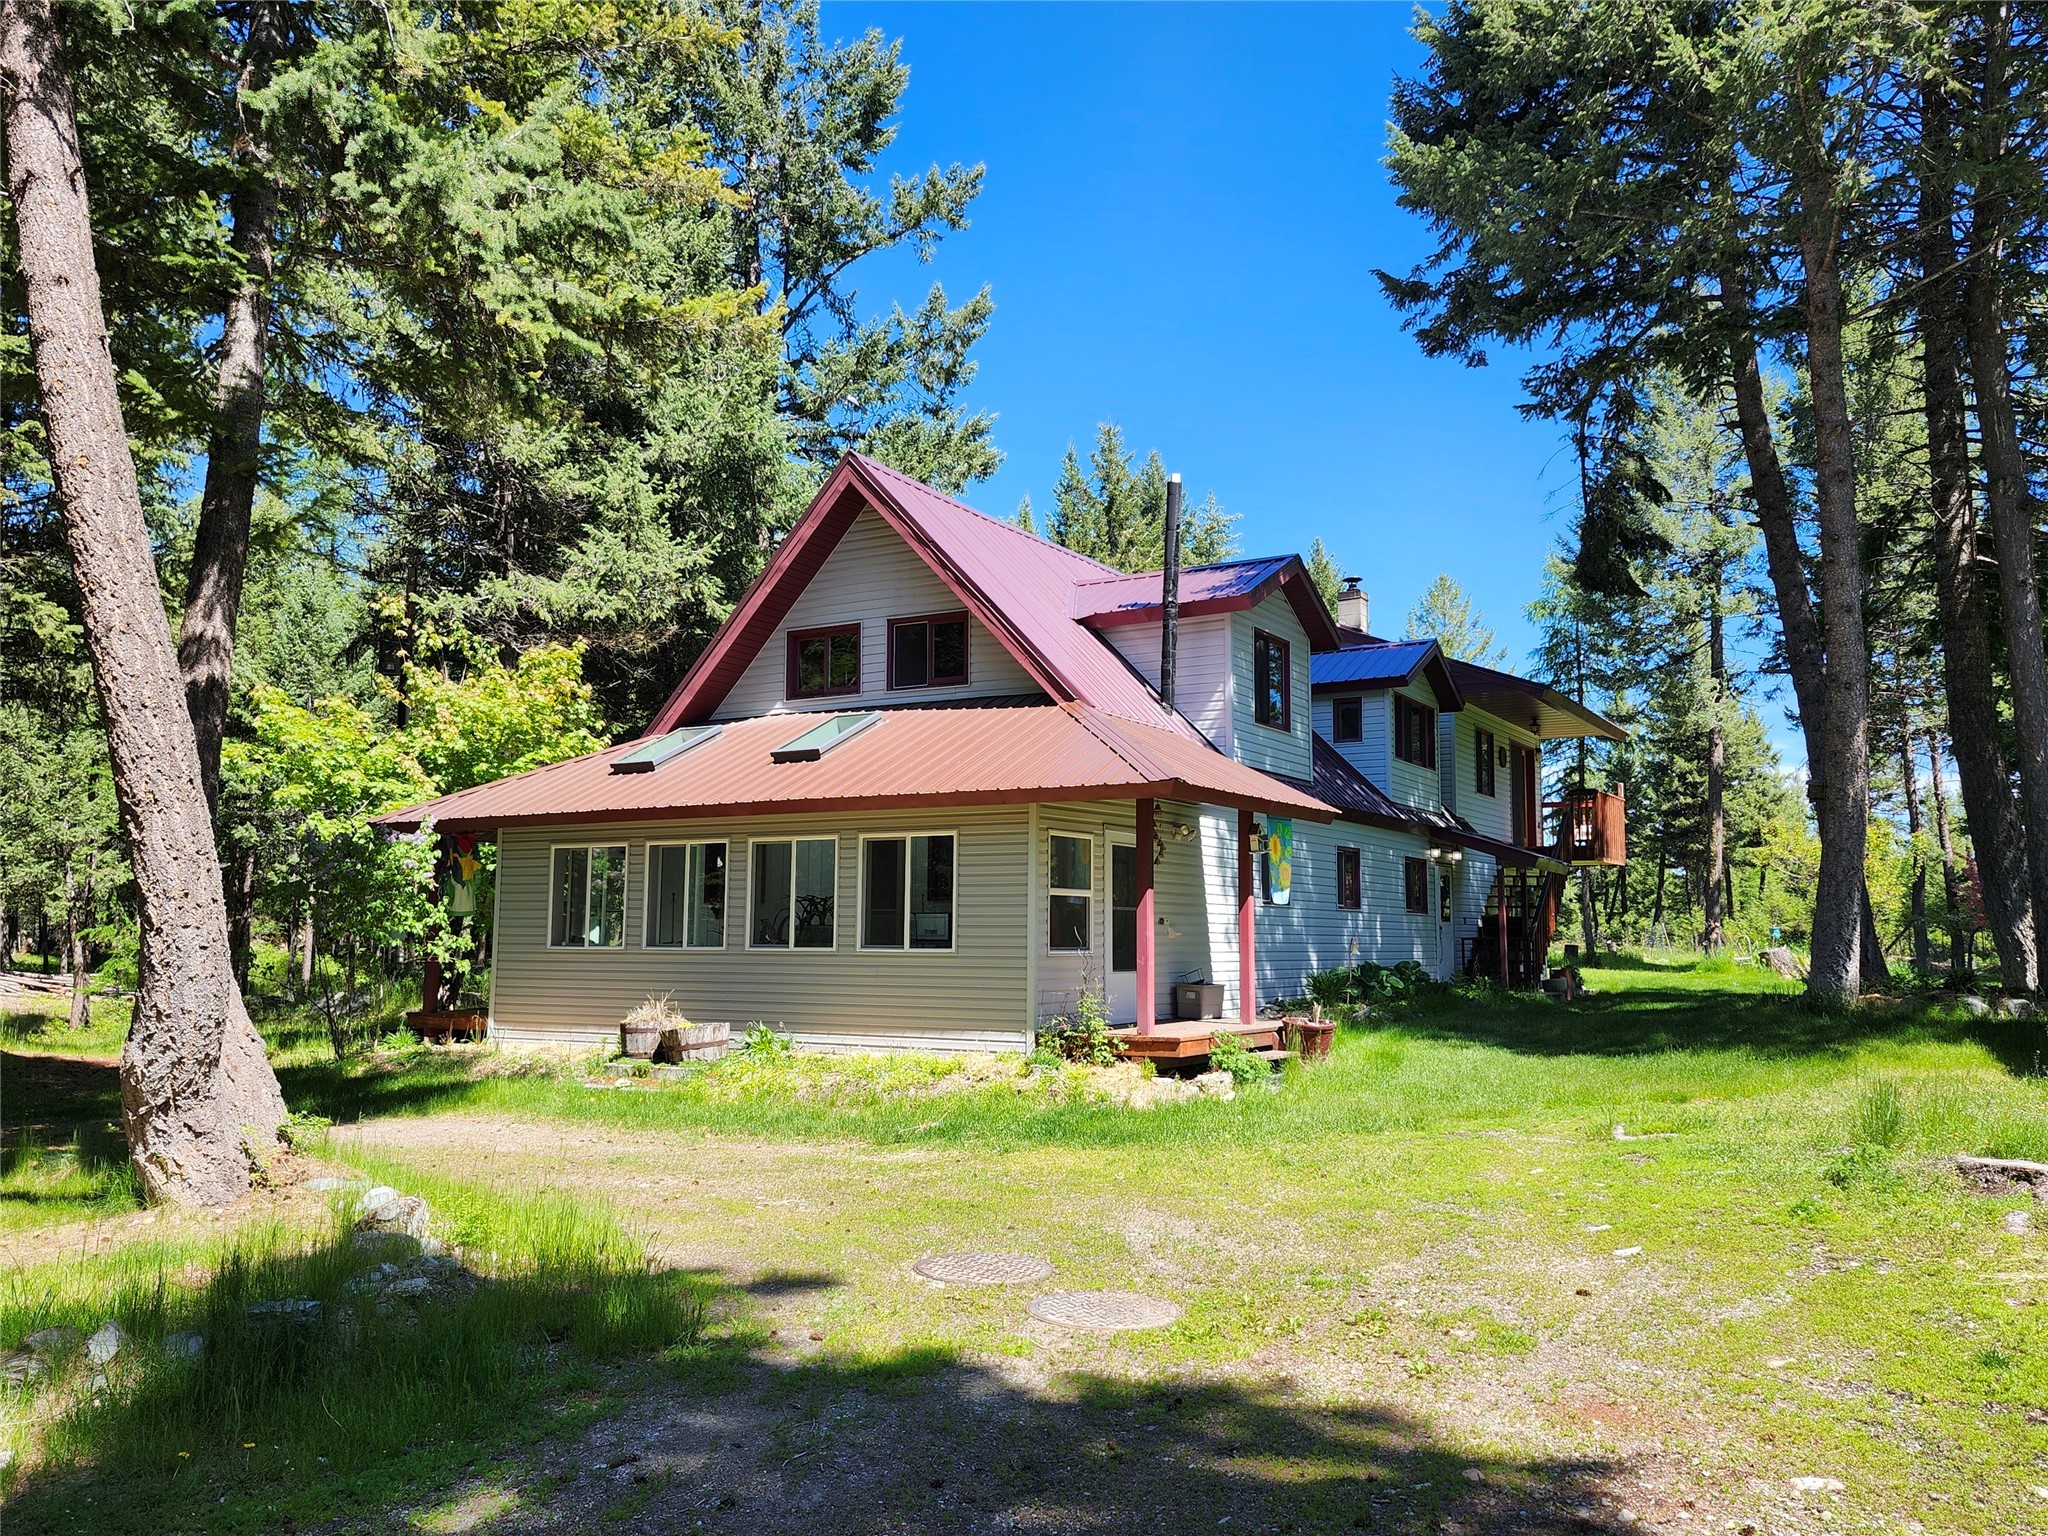 Enjoy this private retreat in the Salish mountains above West Valley, only 14 miles from town. These adjoining parcels comprise 19 +/-  acres which has been managed as a certified tree farm with a stewardship goal of improving habitat to benefit mature Douglas Fir and Western Larch.  Property borders USFS land on the eastern edge and is close on the other sides. Features include comfortable home with lots of natural light and wooden accents throughout. Kitchen boasts spacious bar and antique nickel plated wood cookstove. Warm woodstove and mini-splits for heating and cooling.  Multiple fenced garden areas. Insulated shop garage with 2 heat sources.  Pumphouse wired to accept generator in power outage. Loading dock and Polebarn for your toys.  Close to gated community. Road plowed by county.  Call Sonny Hadley 406-253-4814 or your Real Estate Professional today.